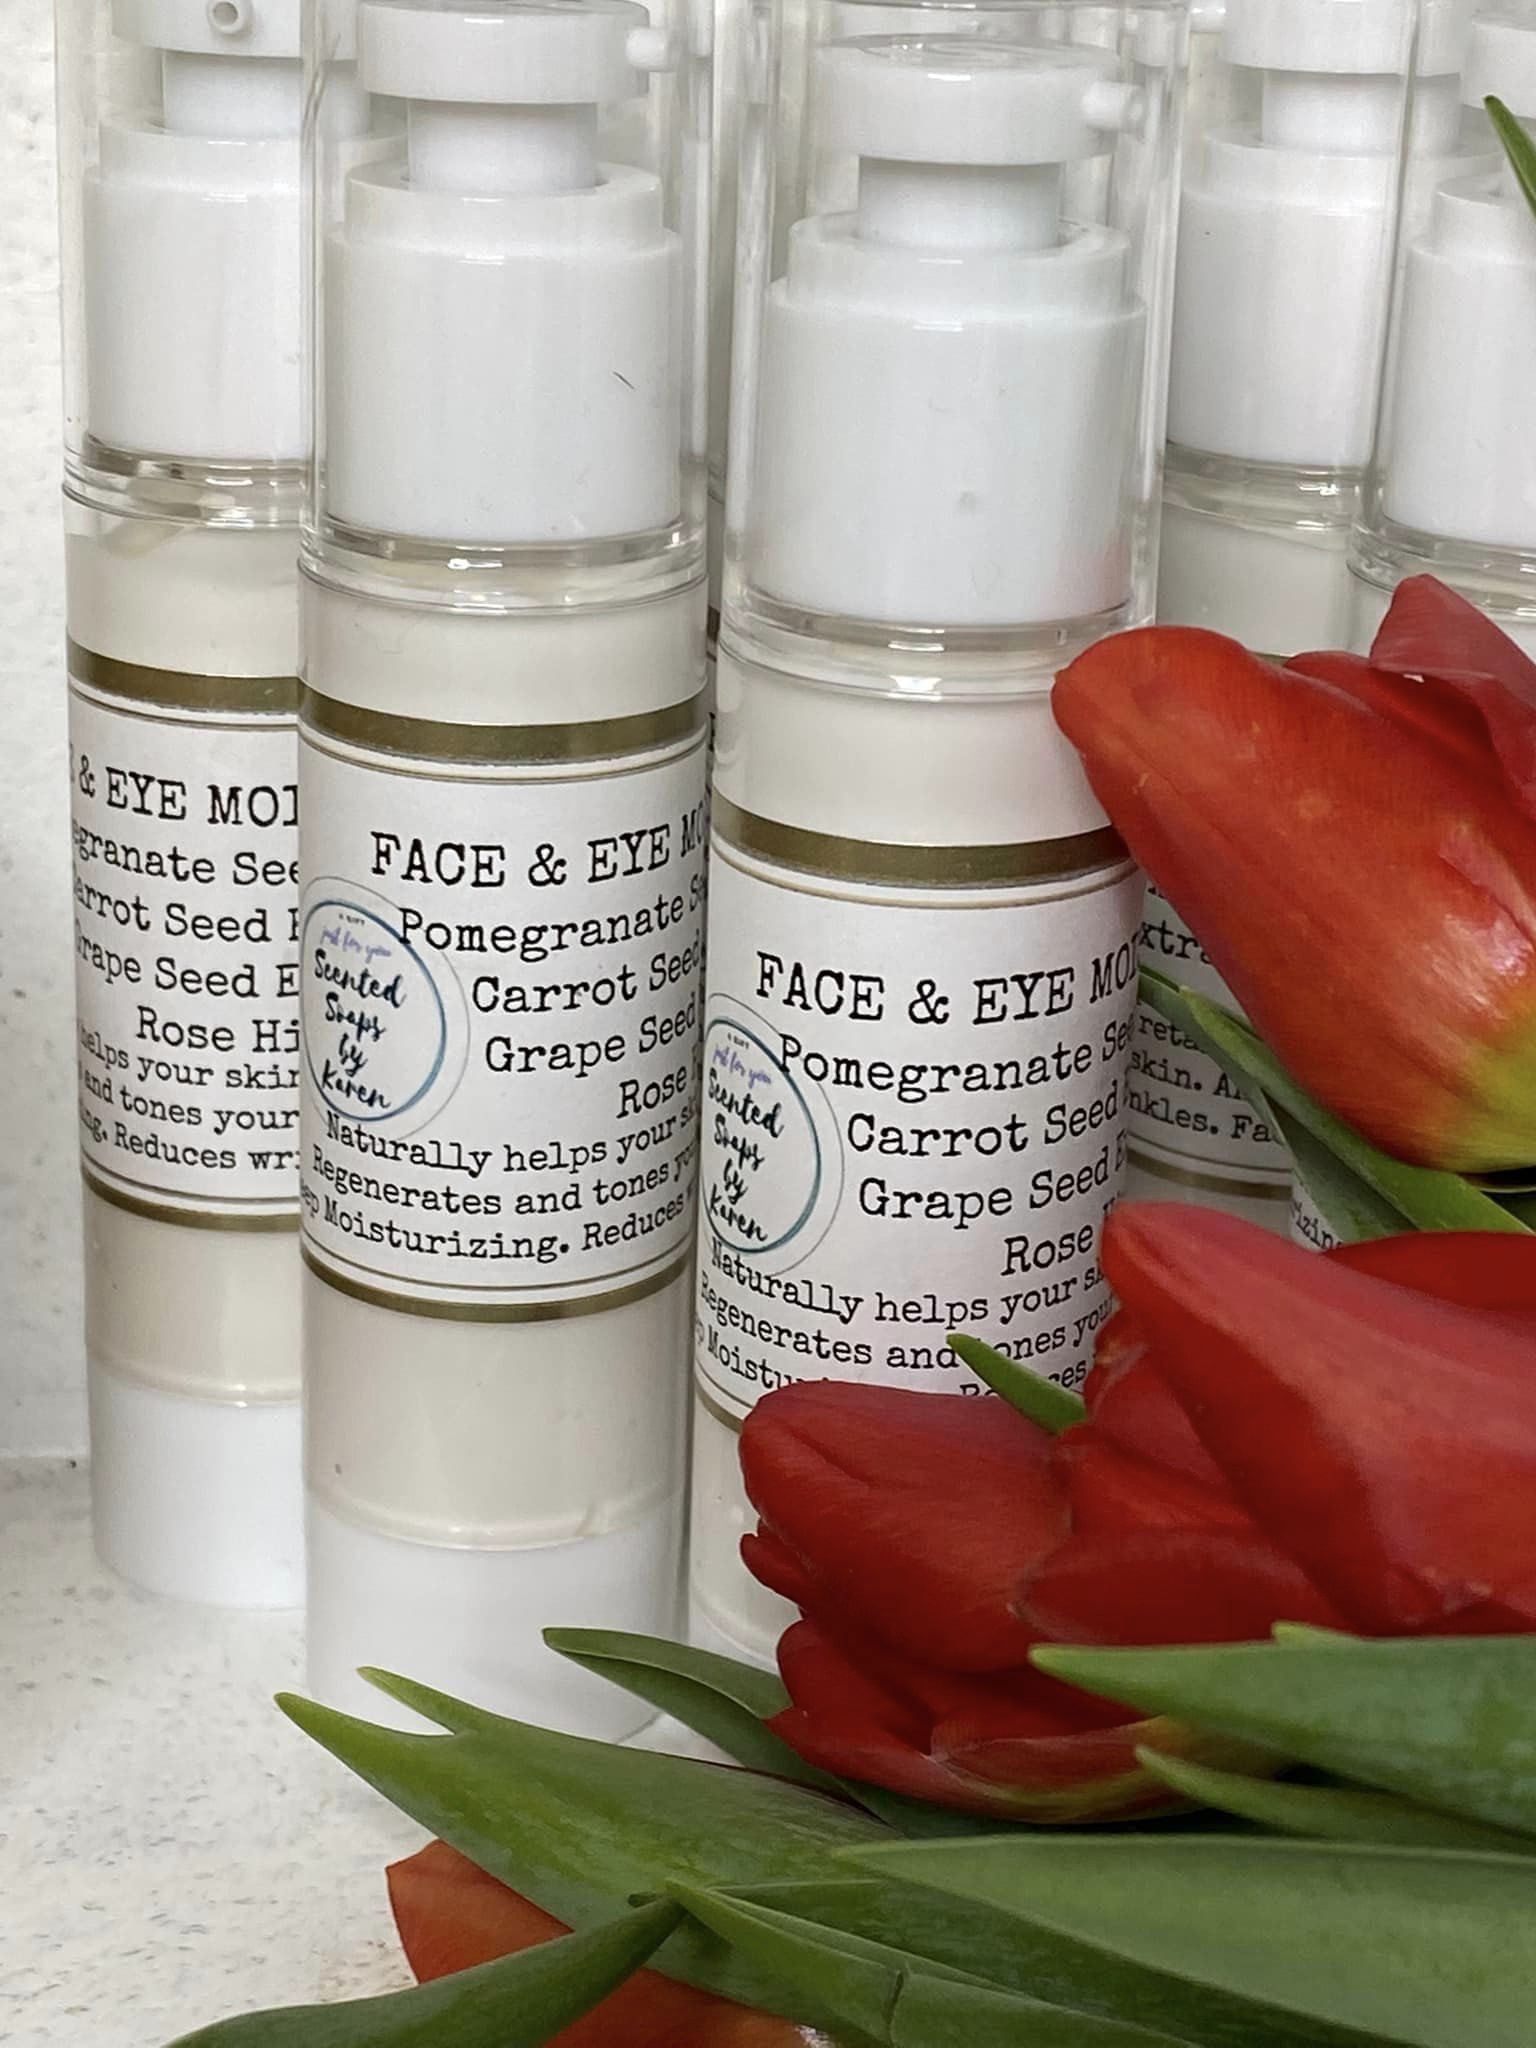 FACE & EYE MOISTURIZER. Made with Pomegranate Seed. Grape Seed Oil. Carrot Seed Oil. NEW INGREDIENTS: Rose Hip, Blueberry and fig.  3 ounces.